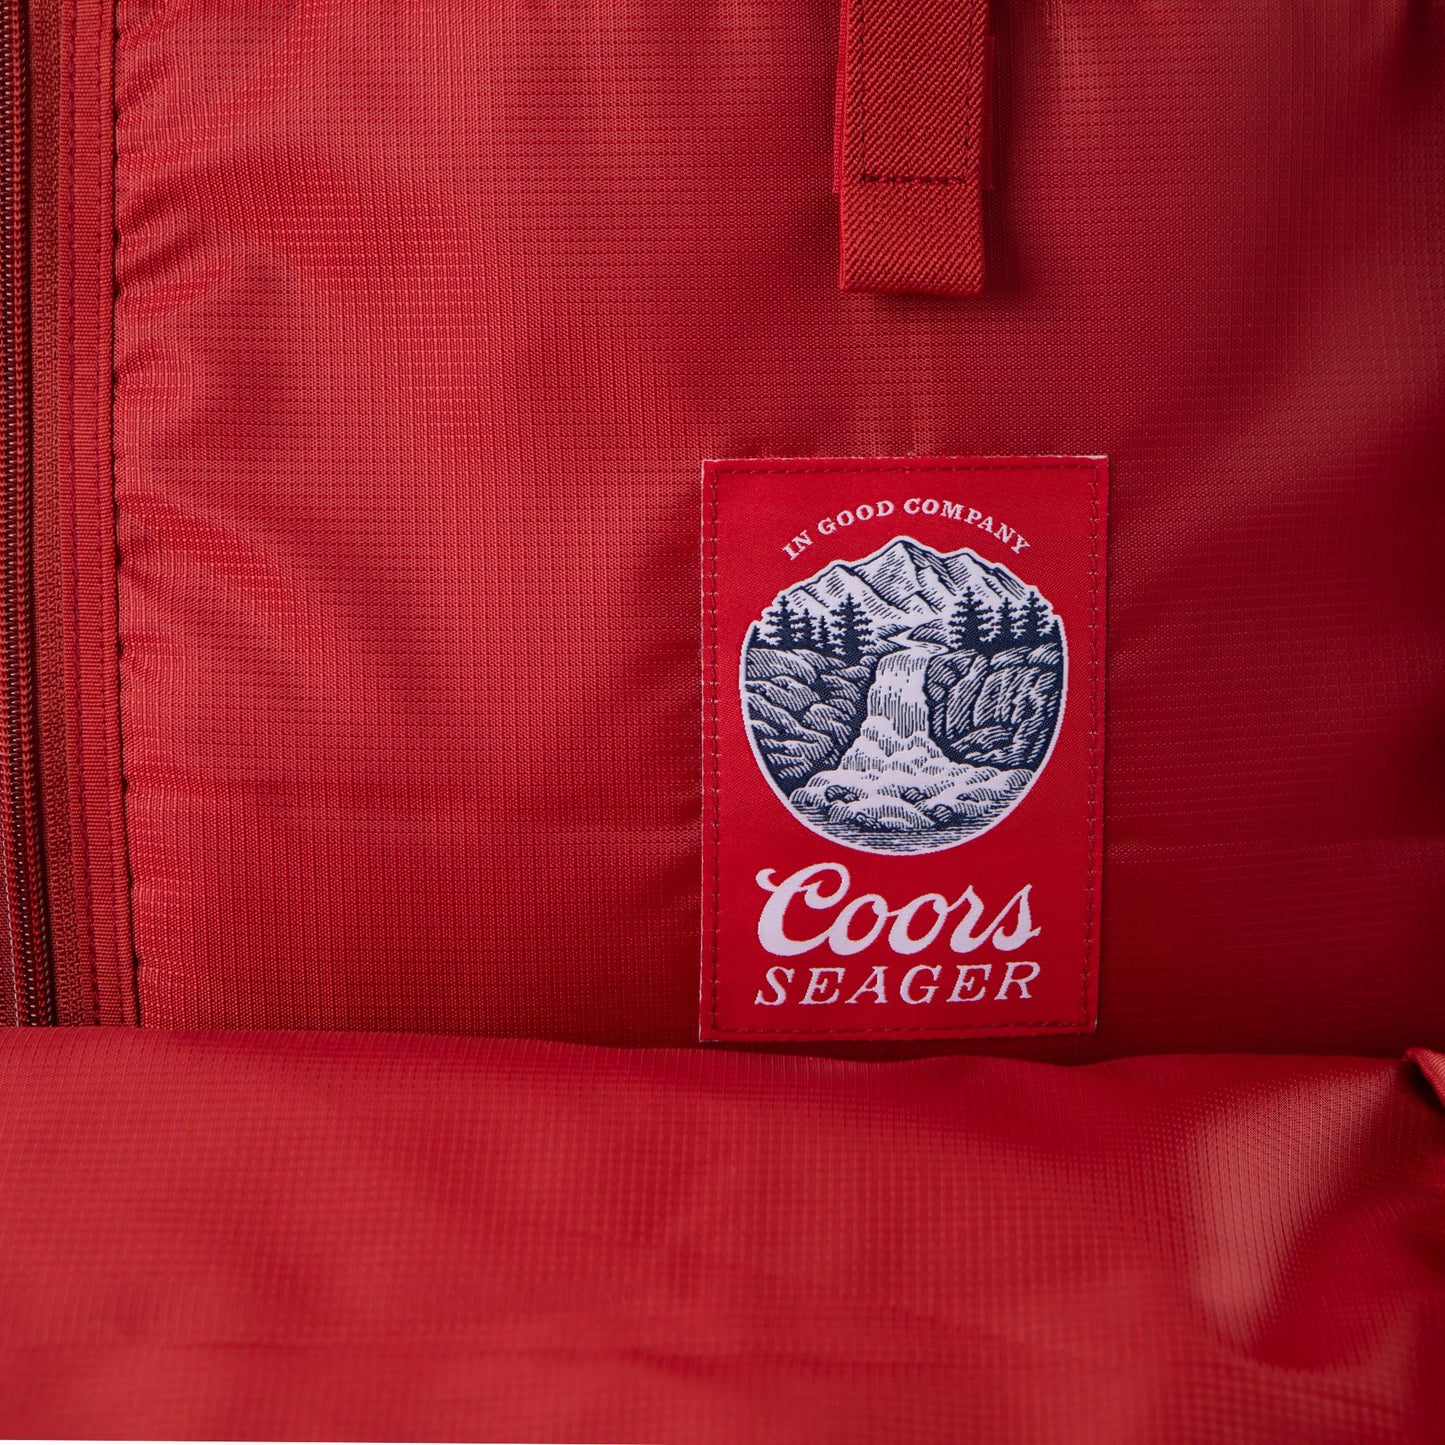 Coors x Seager Quickdraw Bag